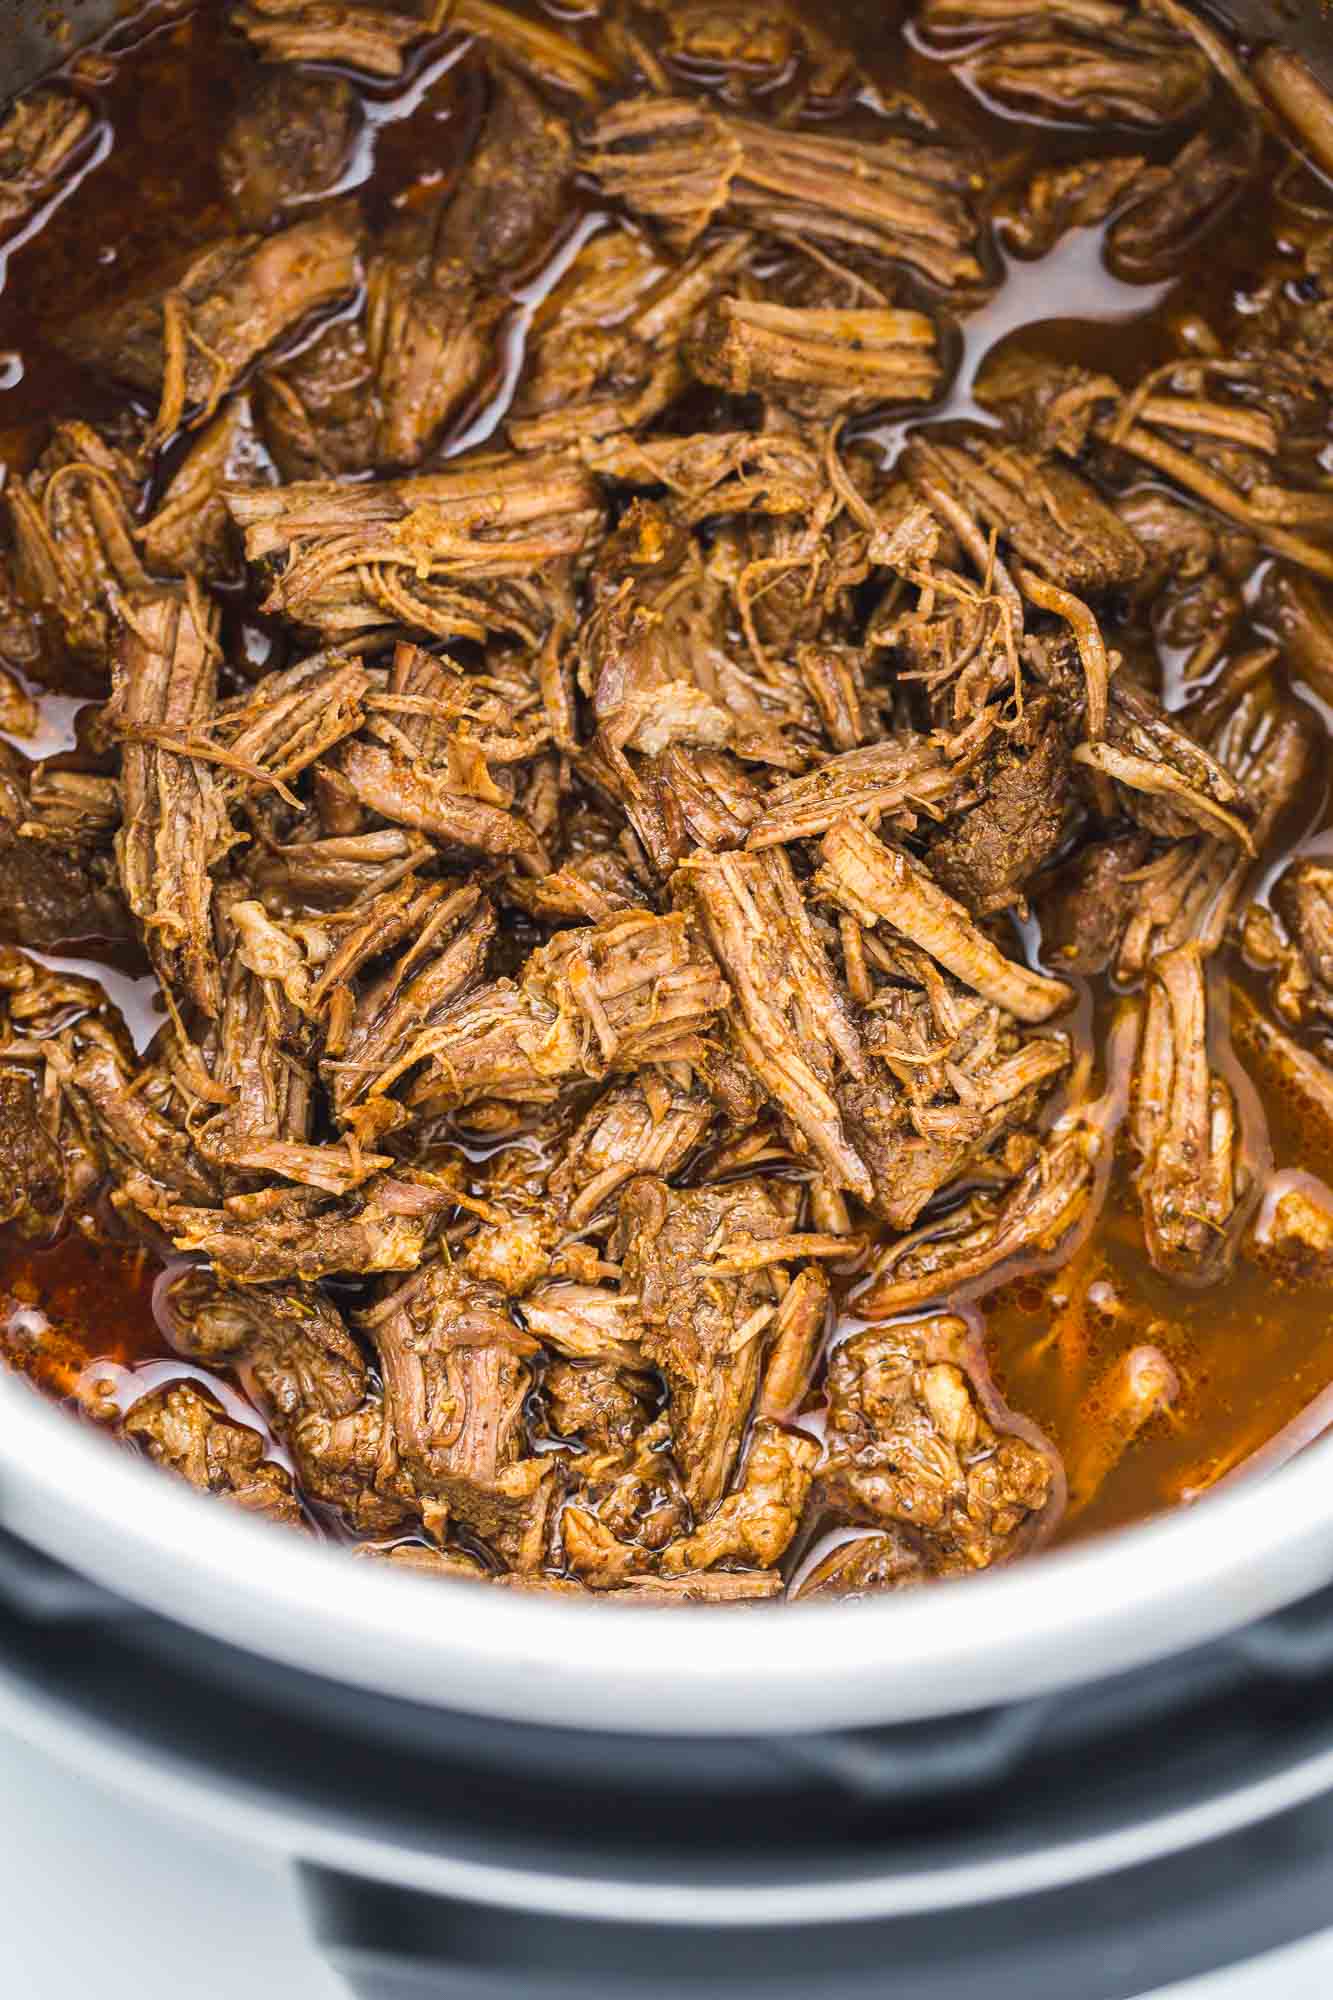 Juicy Mexican shredded beef in an Instant Pot